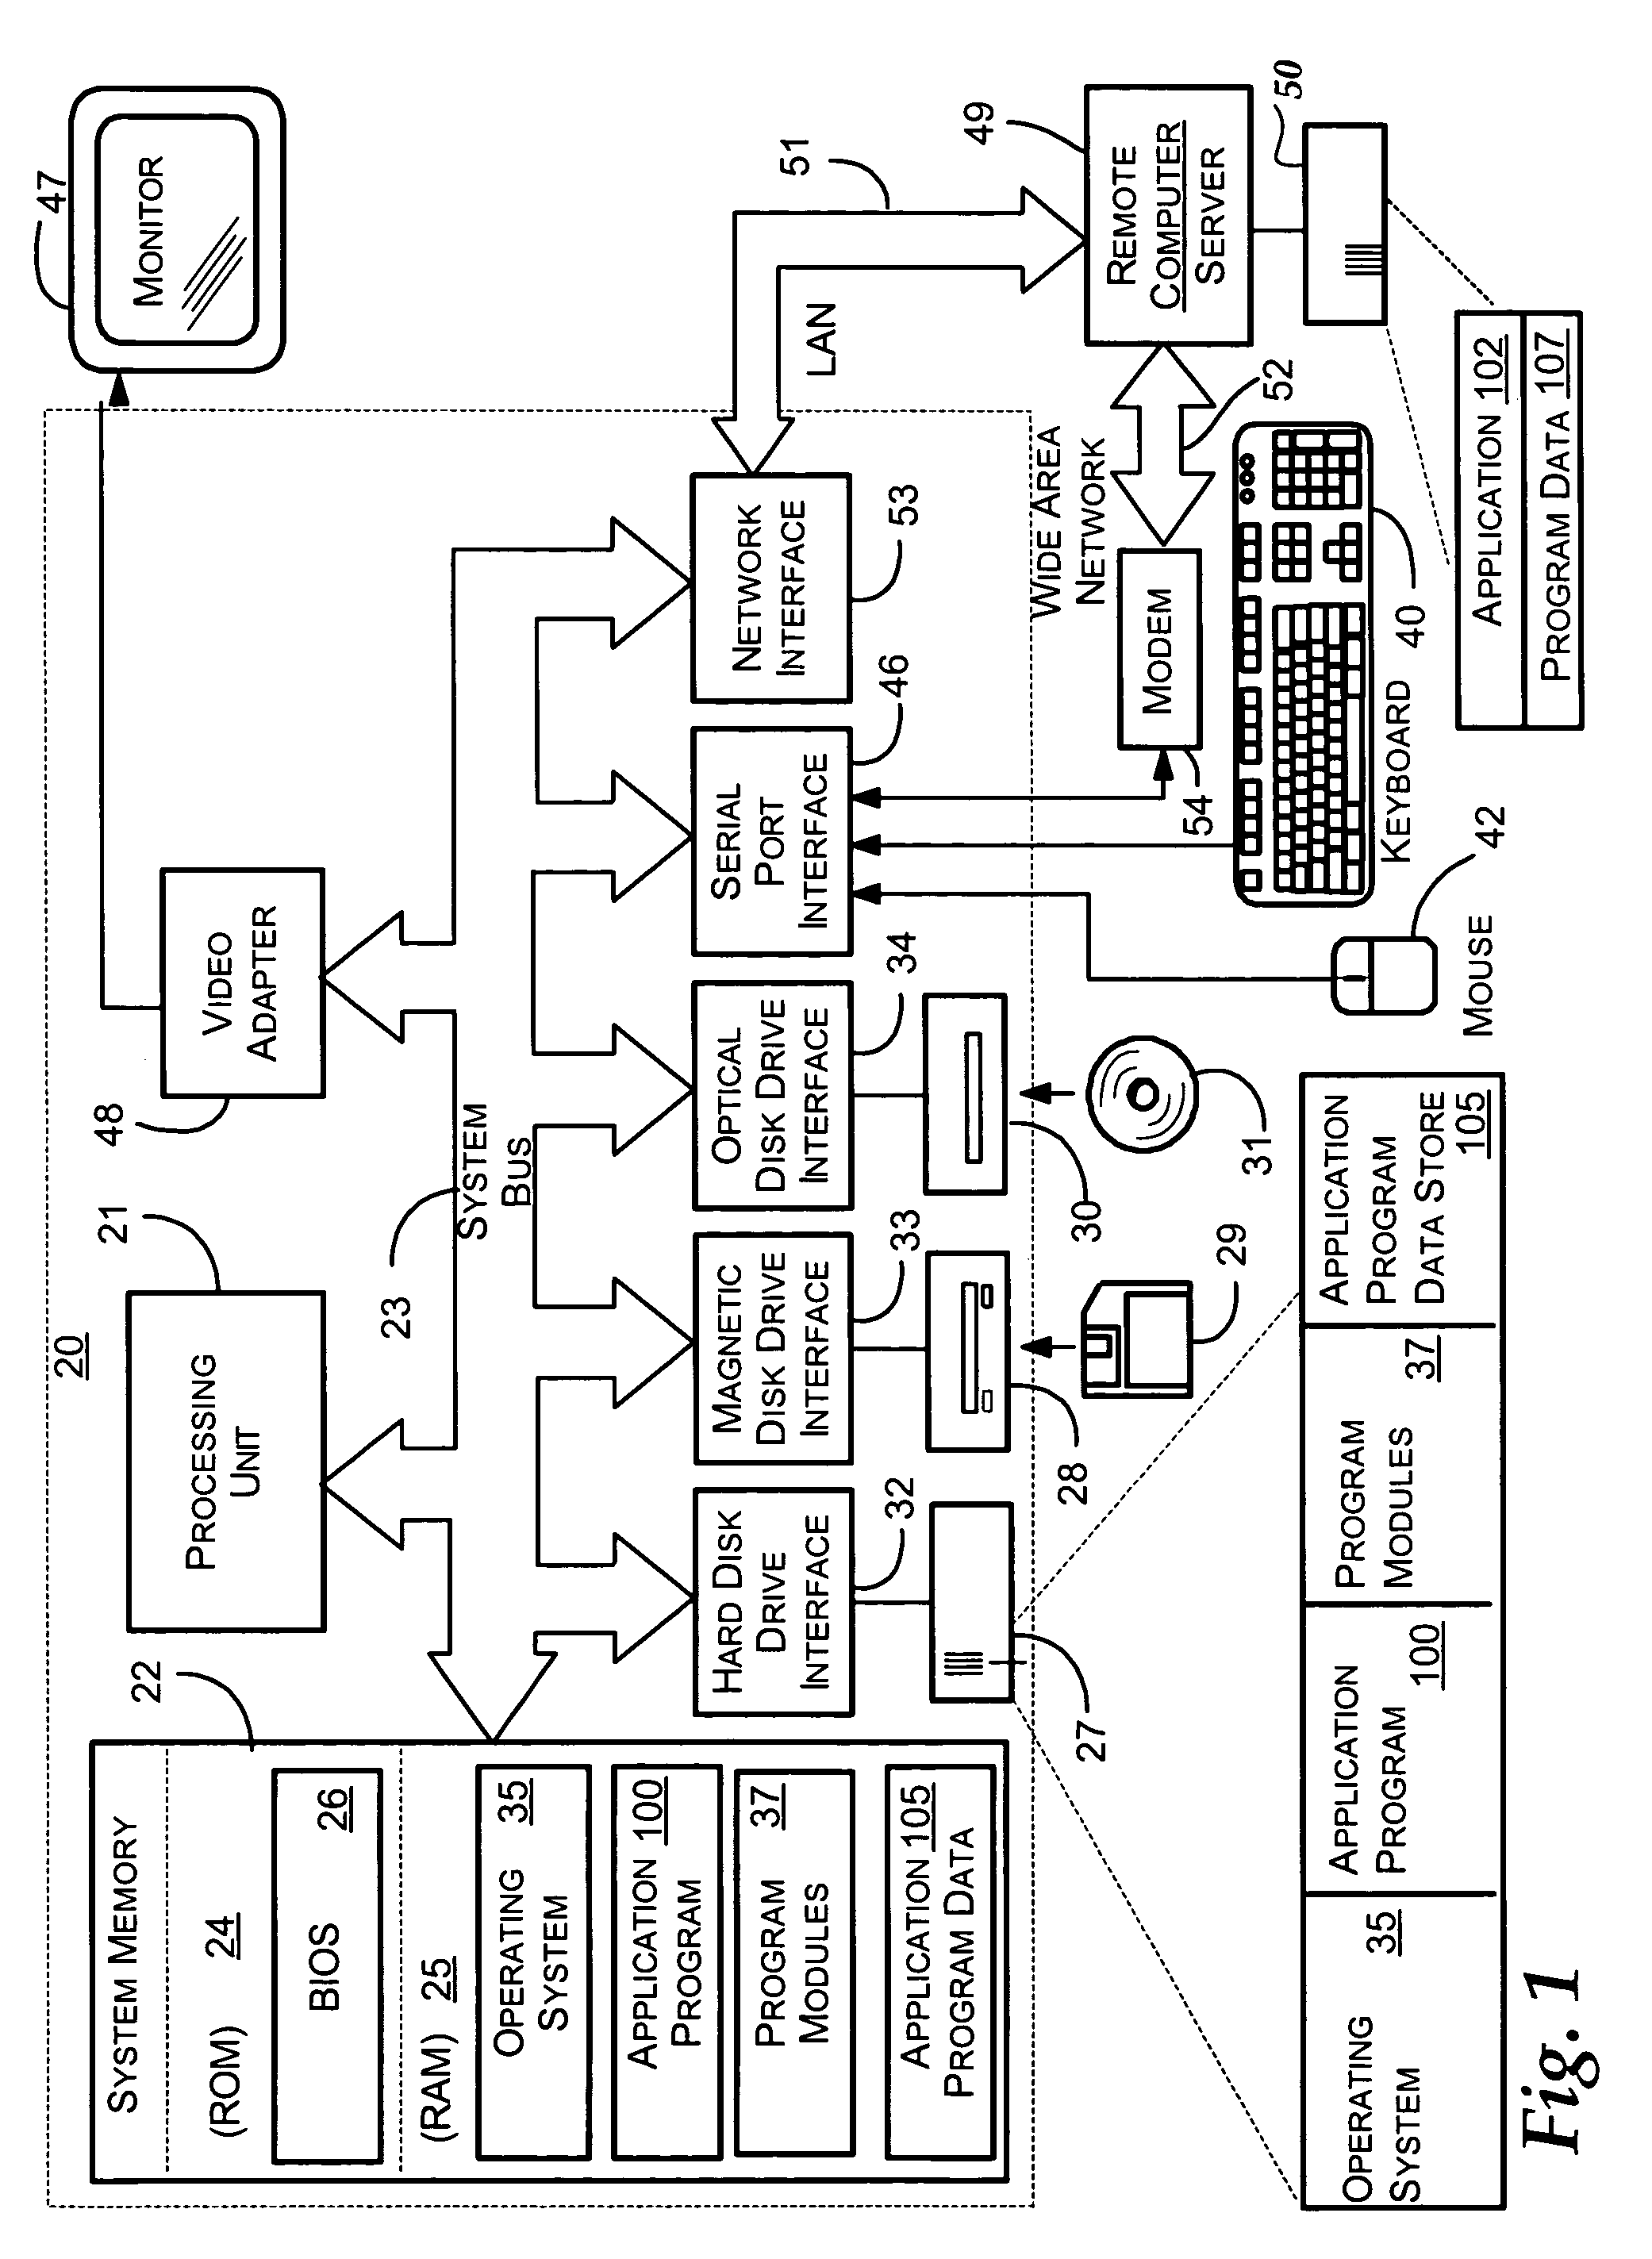 Methods, systems, and computer-readable mediums for providing persisting and continuously updating search folders